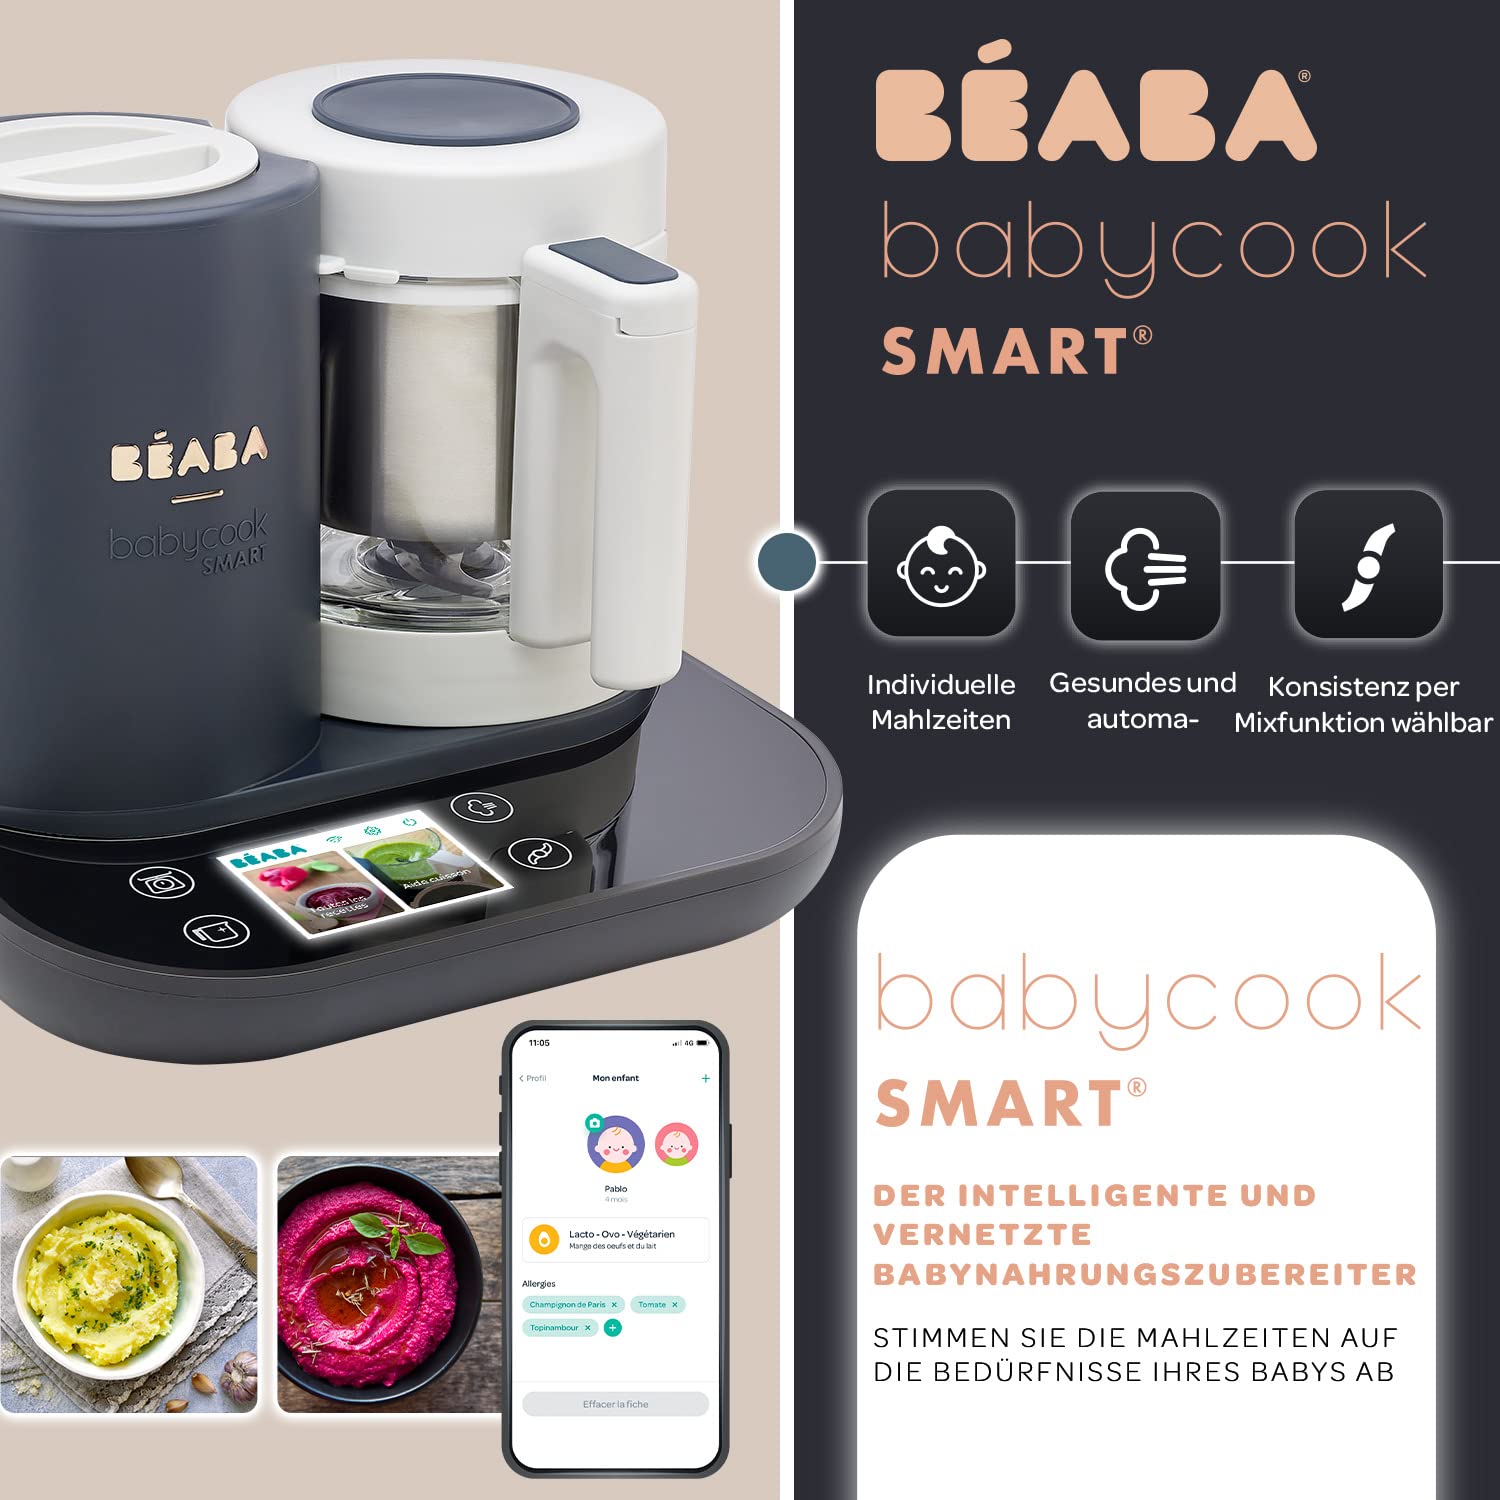 Beaba Béaba, Babycook Smart Cooking Machine for Baby Food, Controllable via App, with Scales, Glass Bowl, Stainless Steel Basket, Capacity 2.25 L, Gentle Steaming and Mixing, Touch Screen, Anthracite